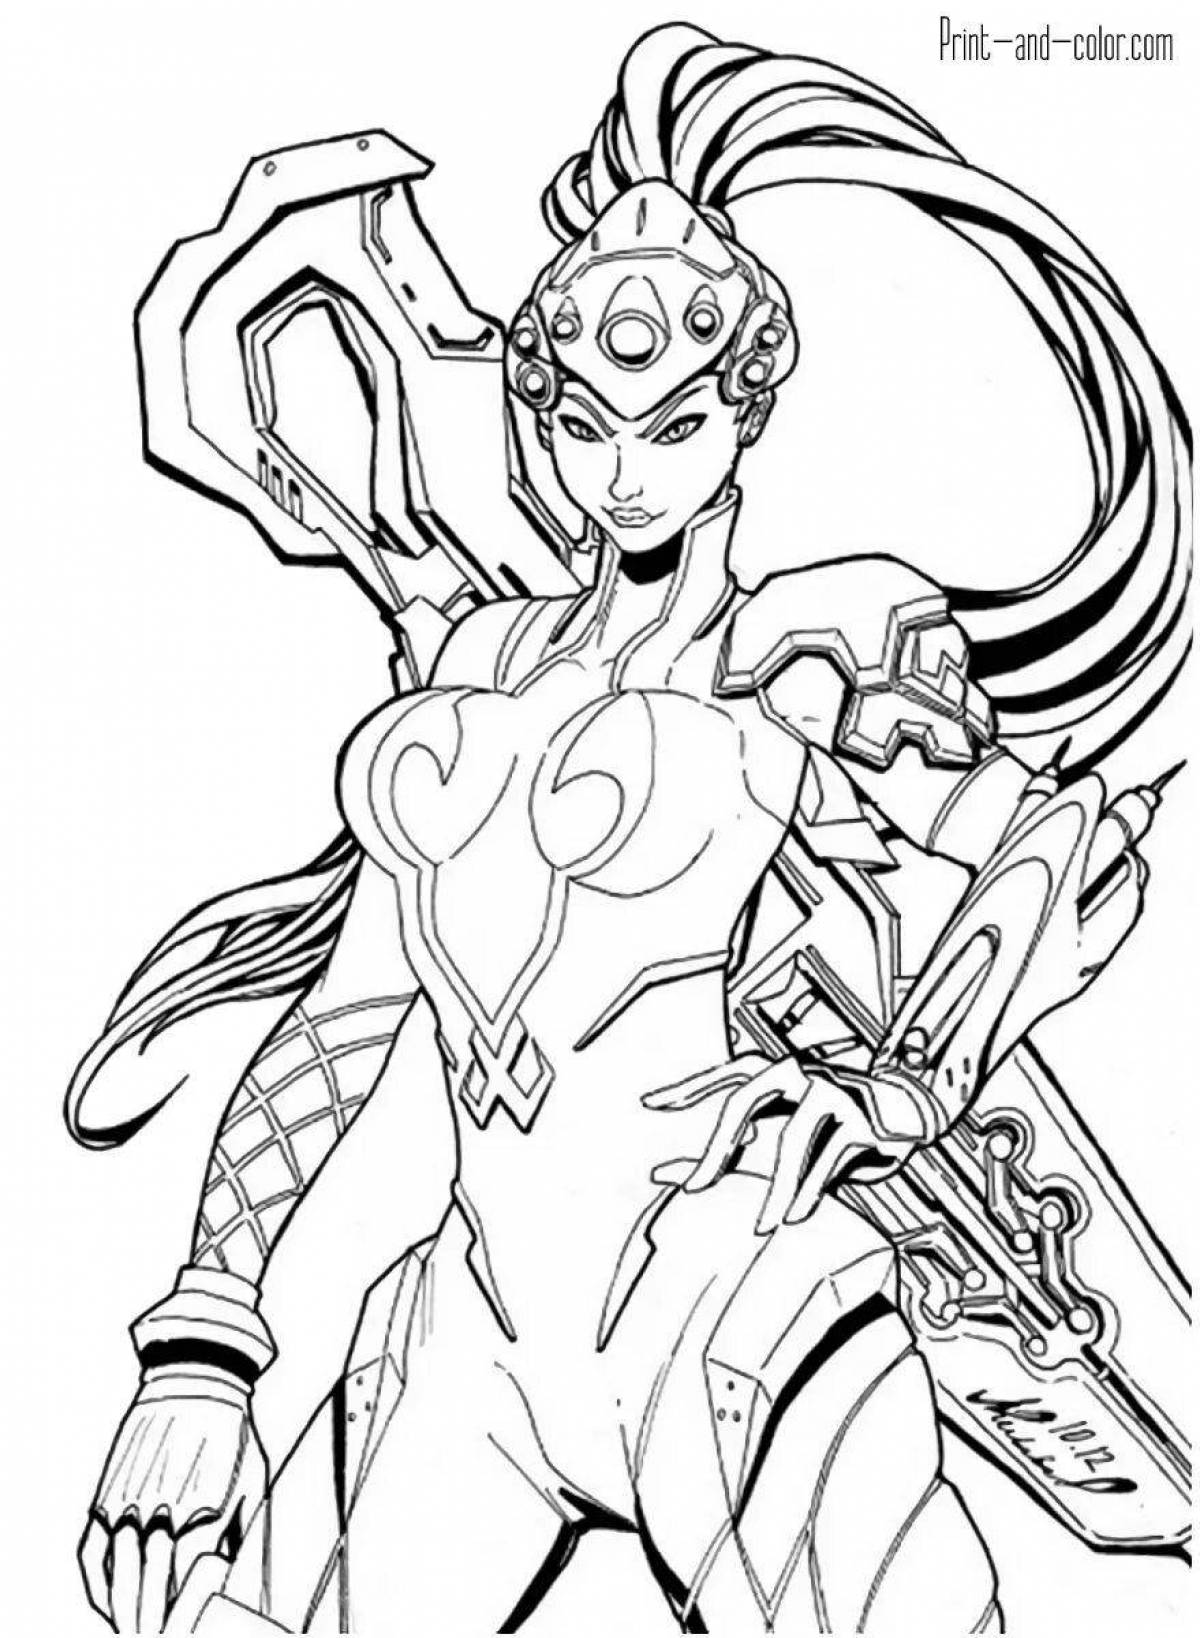 Amazing overwatch coloring page